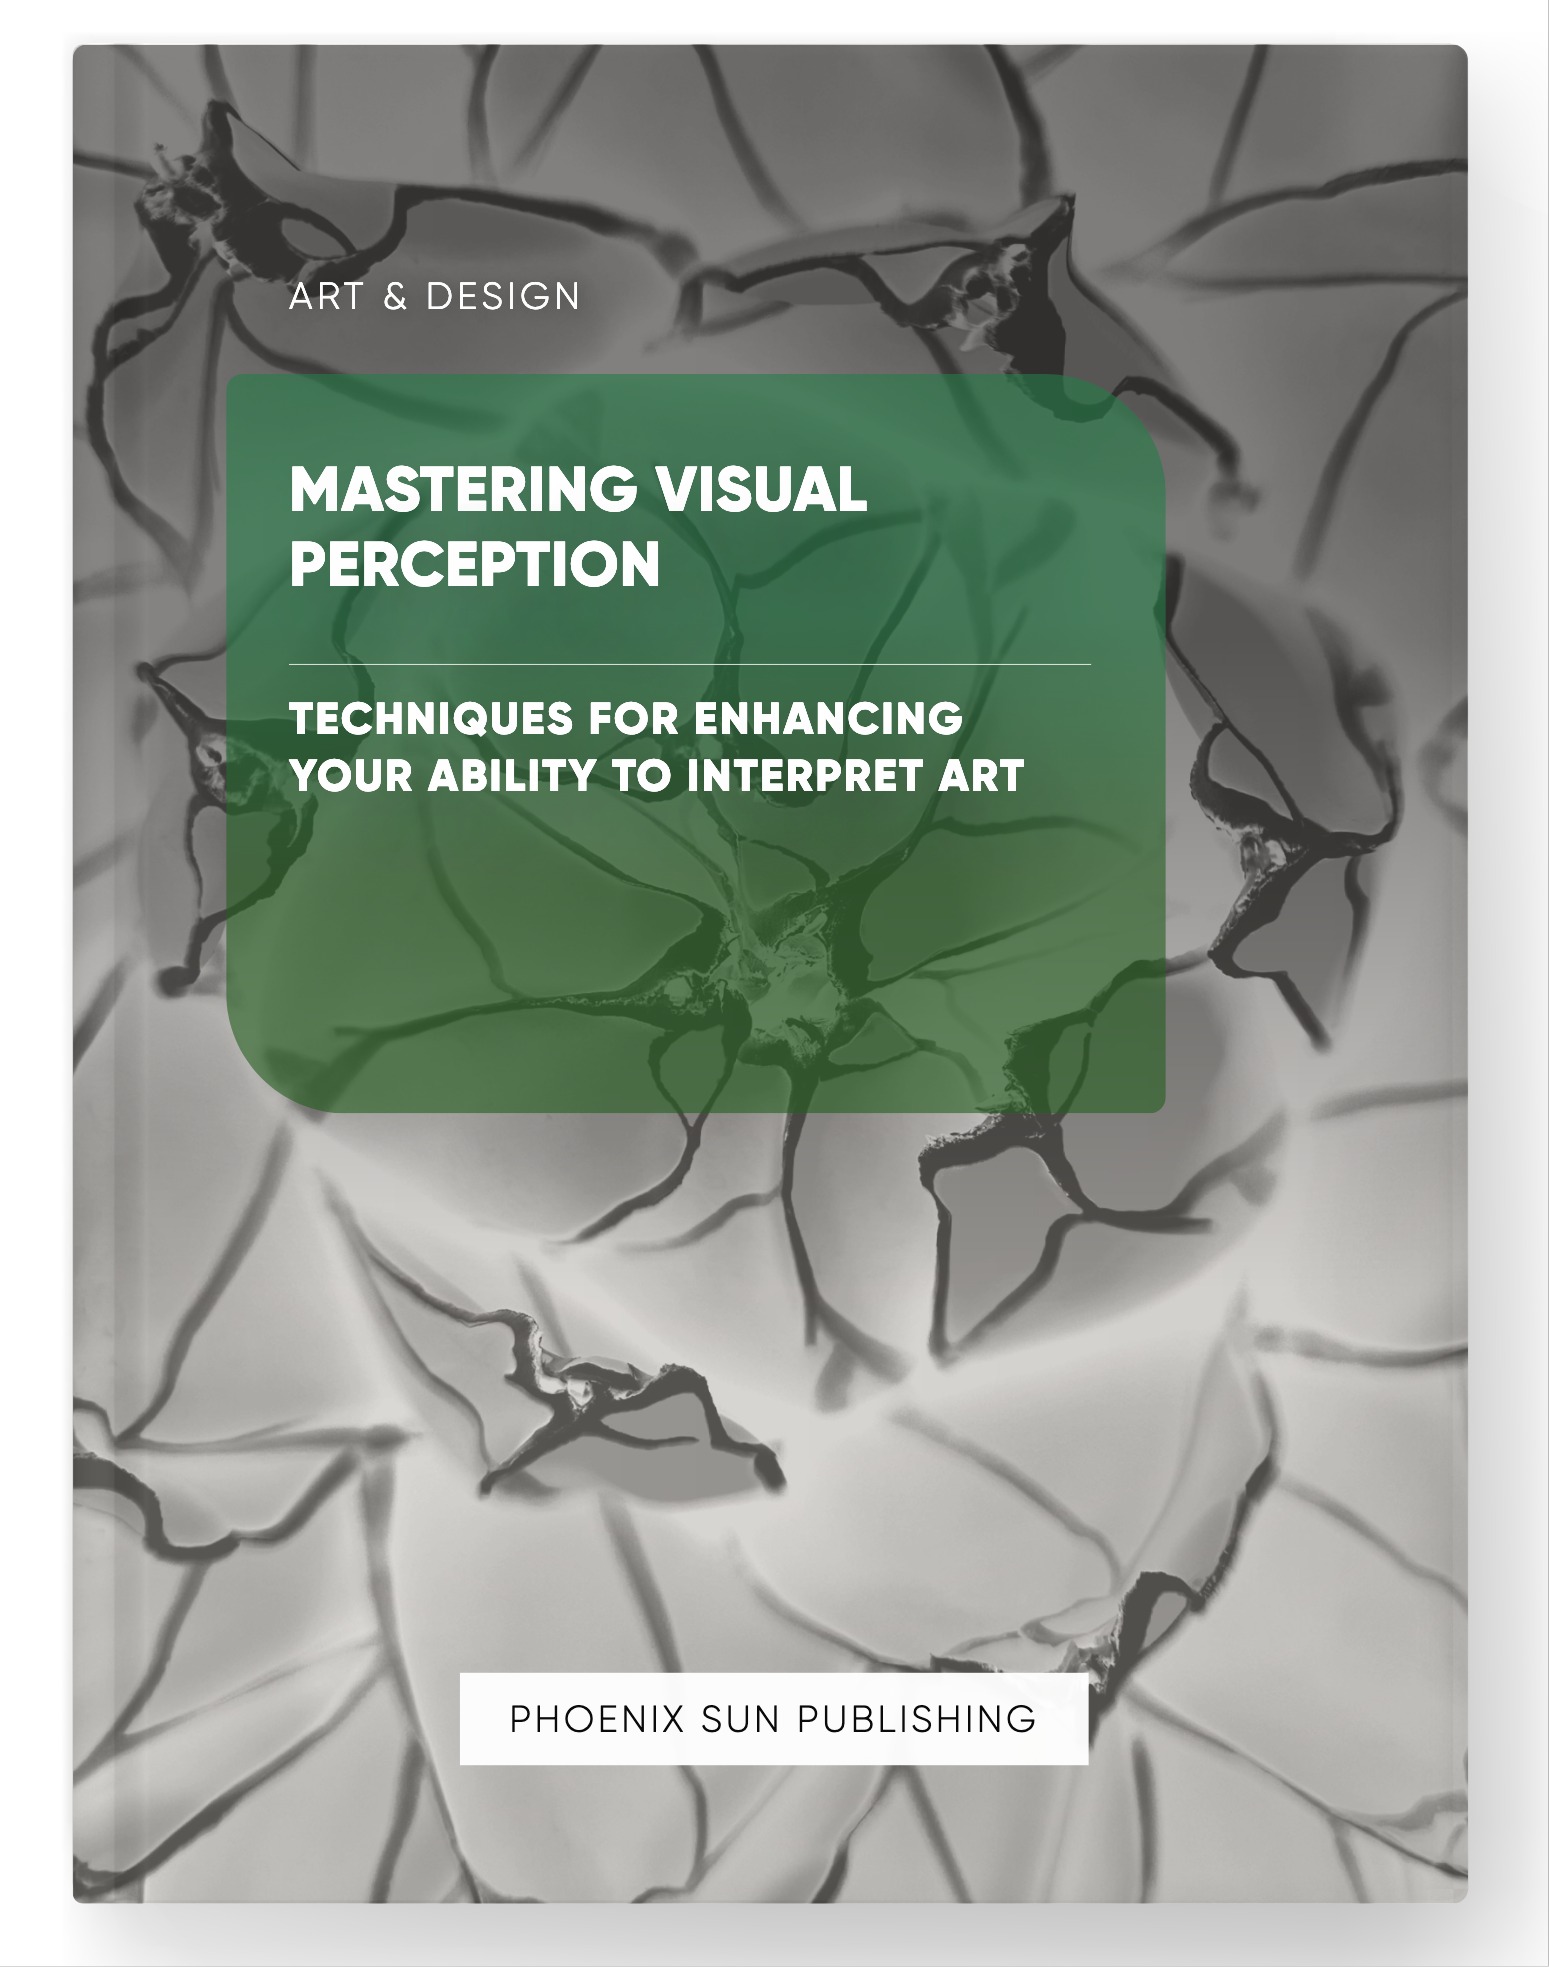 Mastering Visual Perception – Techniques for Enhancing Your Ability to Interpret Art